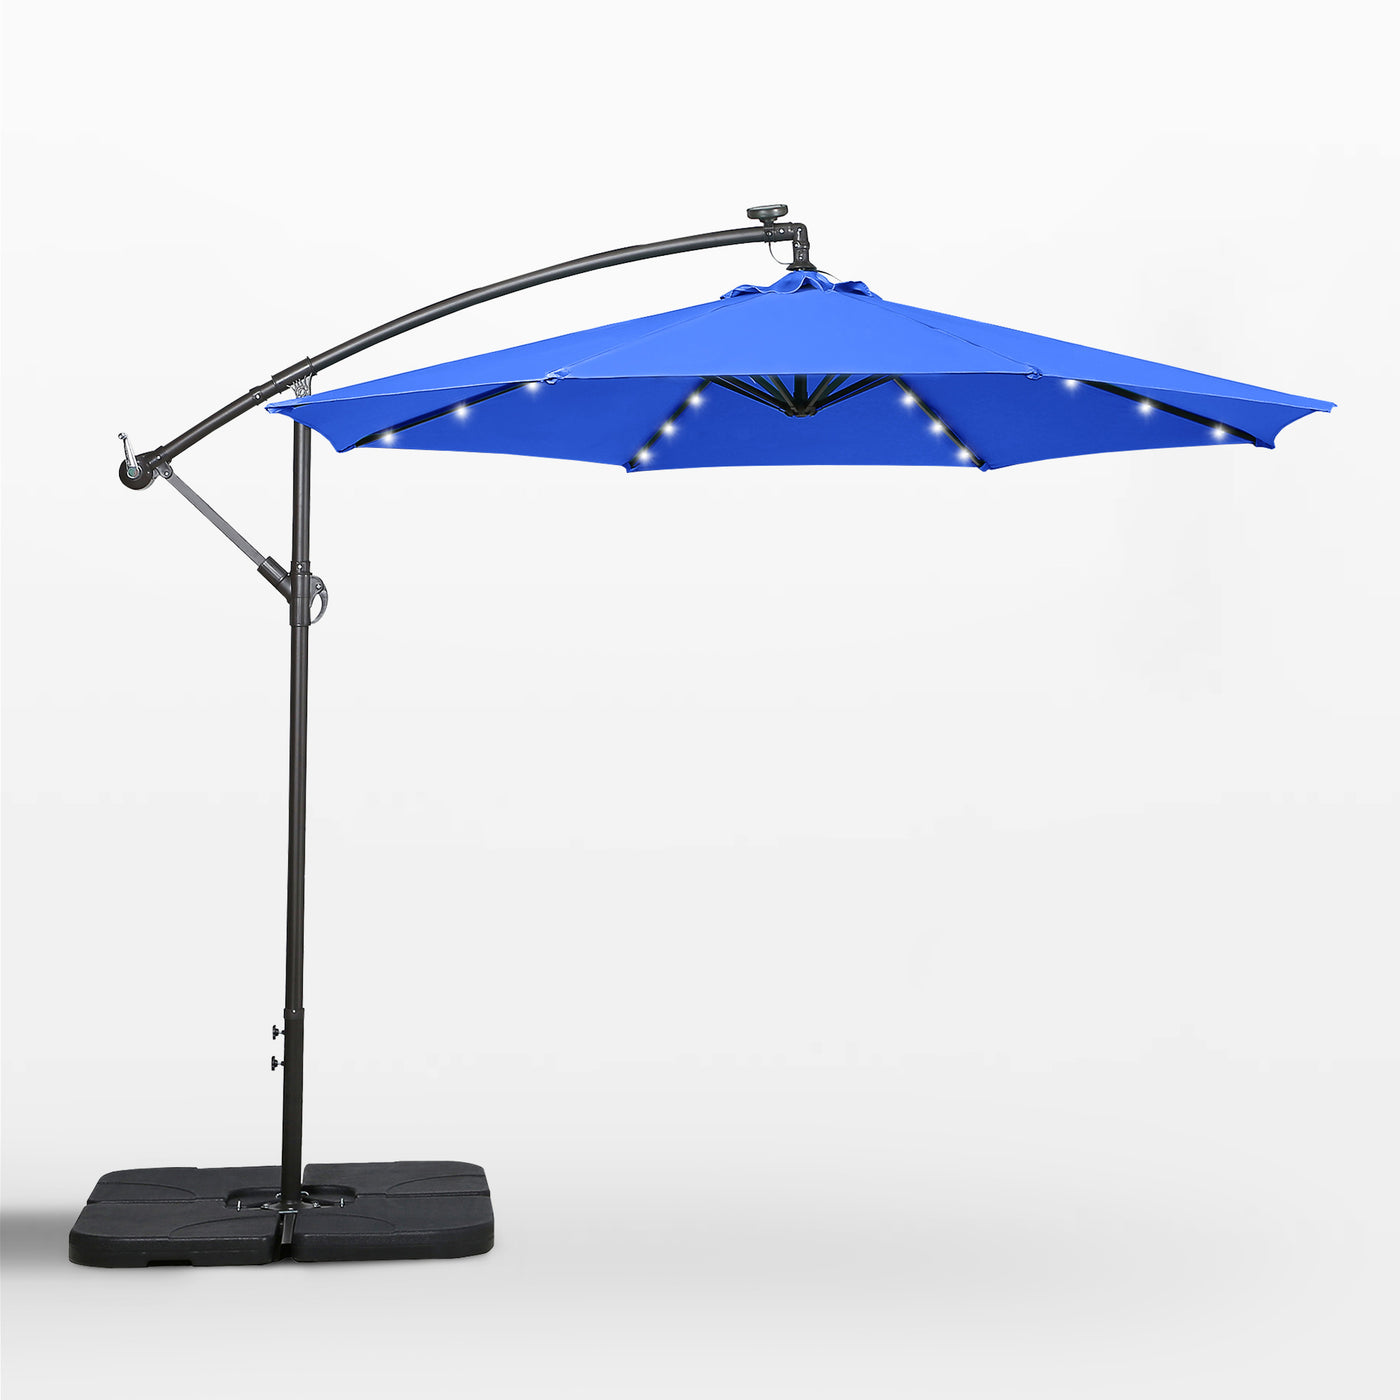 Albert 10 Ft Outdoor Solar LED Cantilever Umbrella with Base Weights